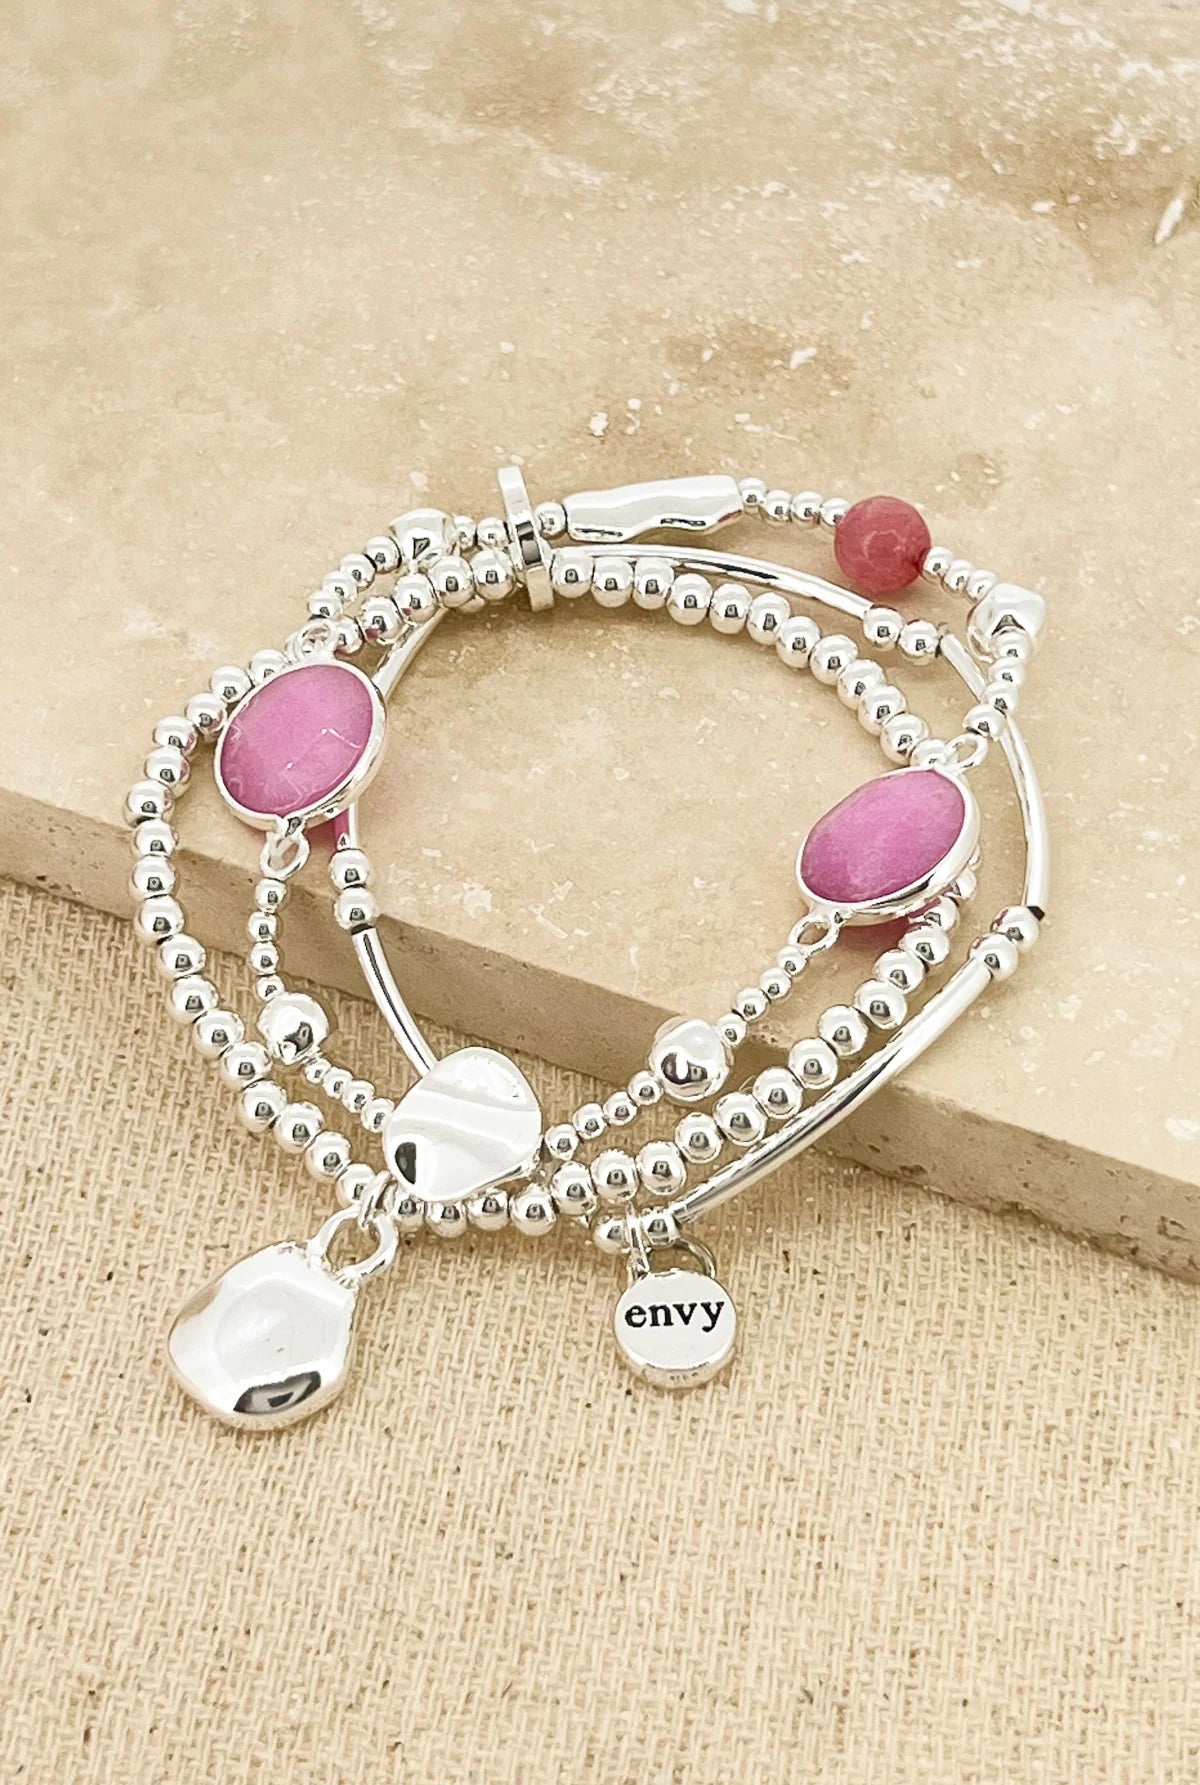 Envy Triple Layer Silver Alloy Stretch Bracelet with Pink Semi Precious Stone Beads